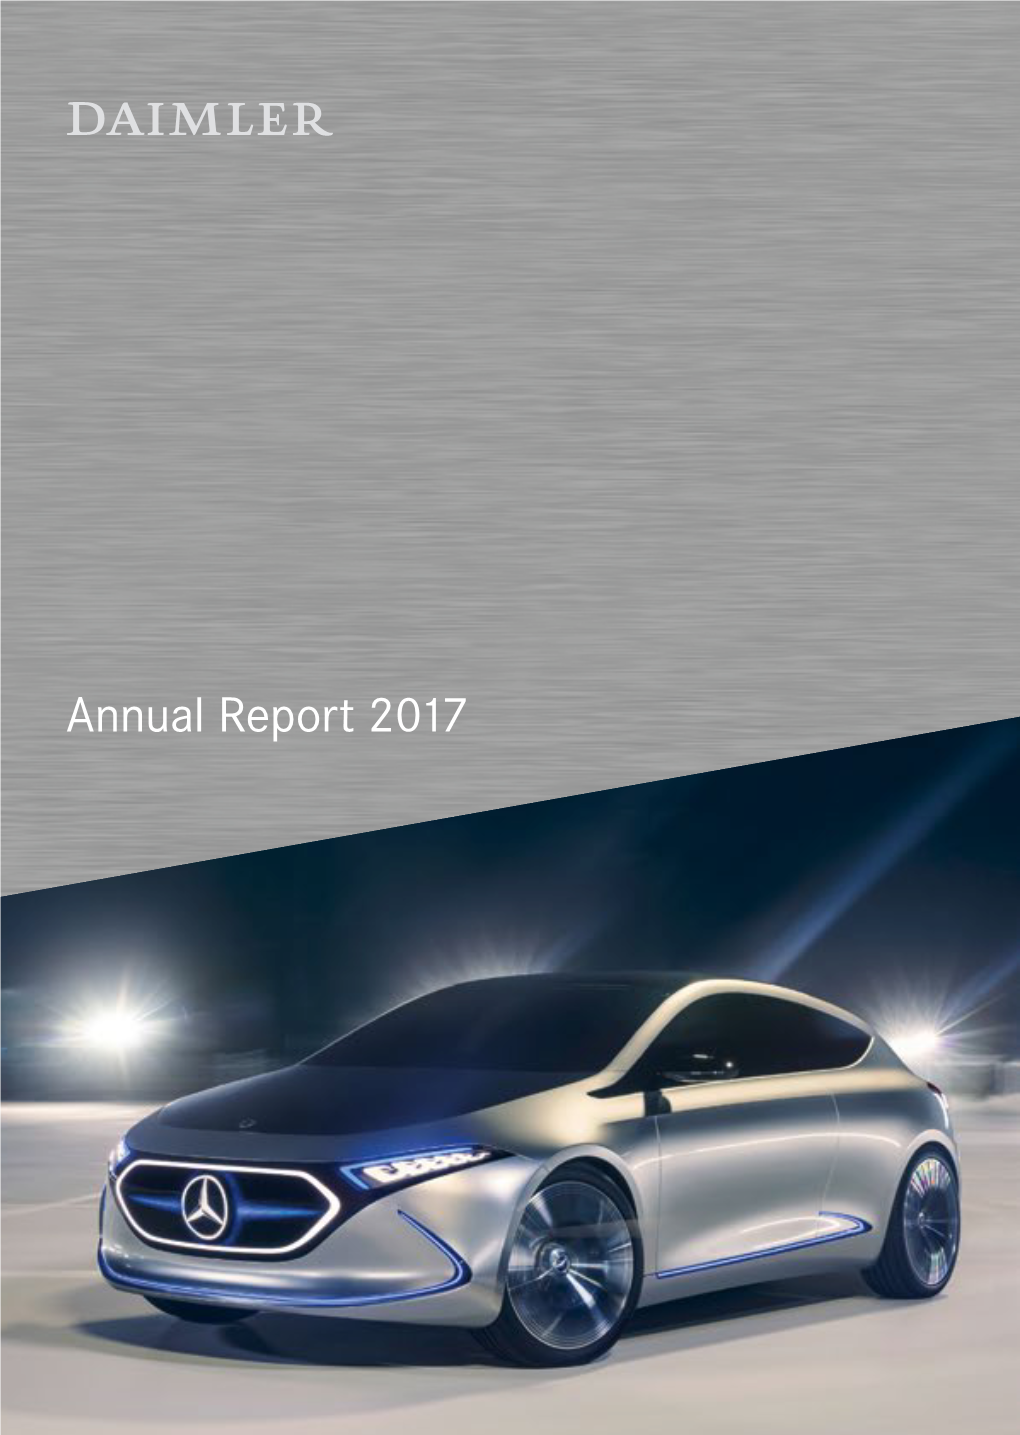 Daimler Annual Report 2017 | #1 | Core Case Culture Company As a Leading Vehicle Manufacturer …